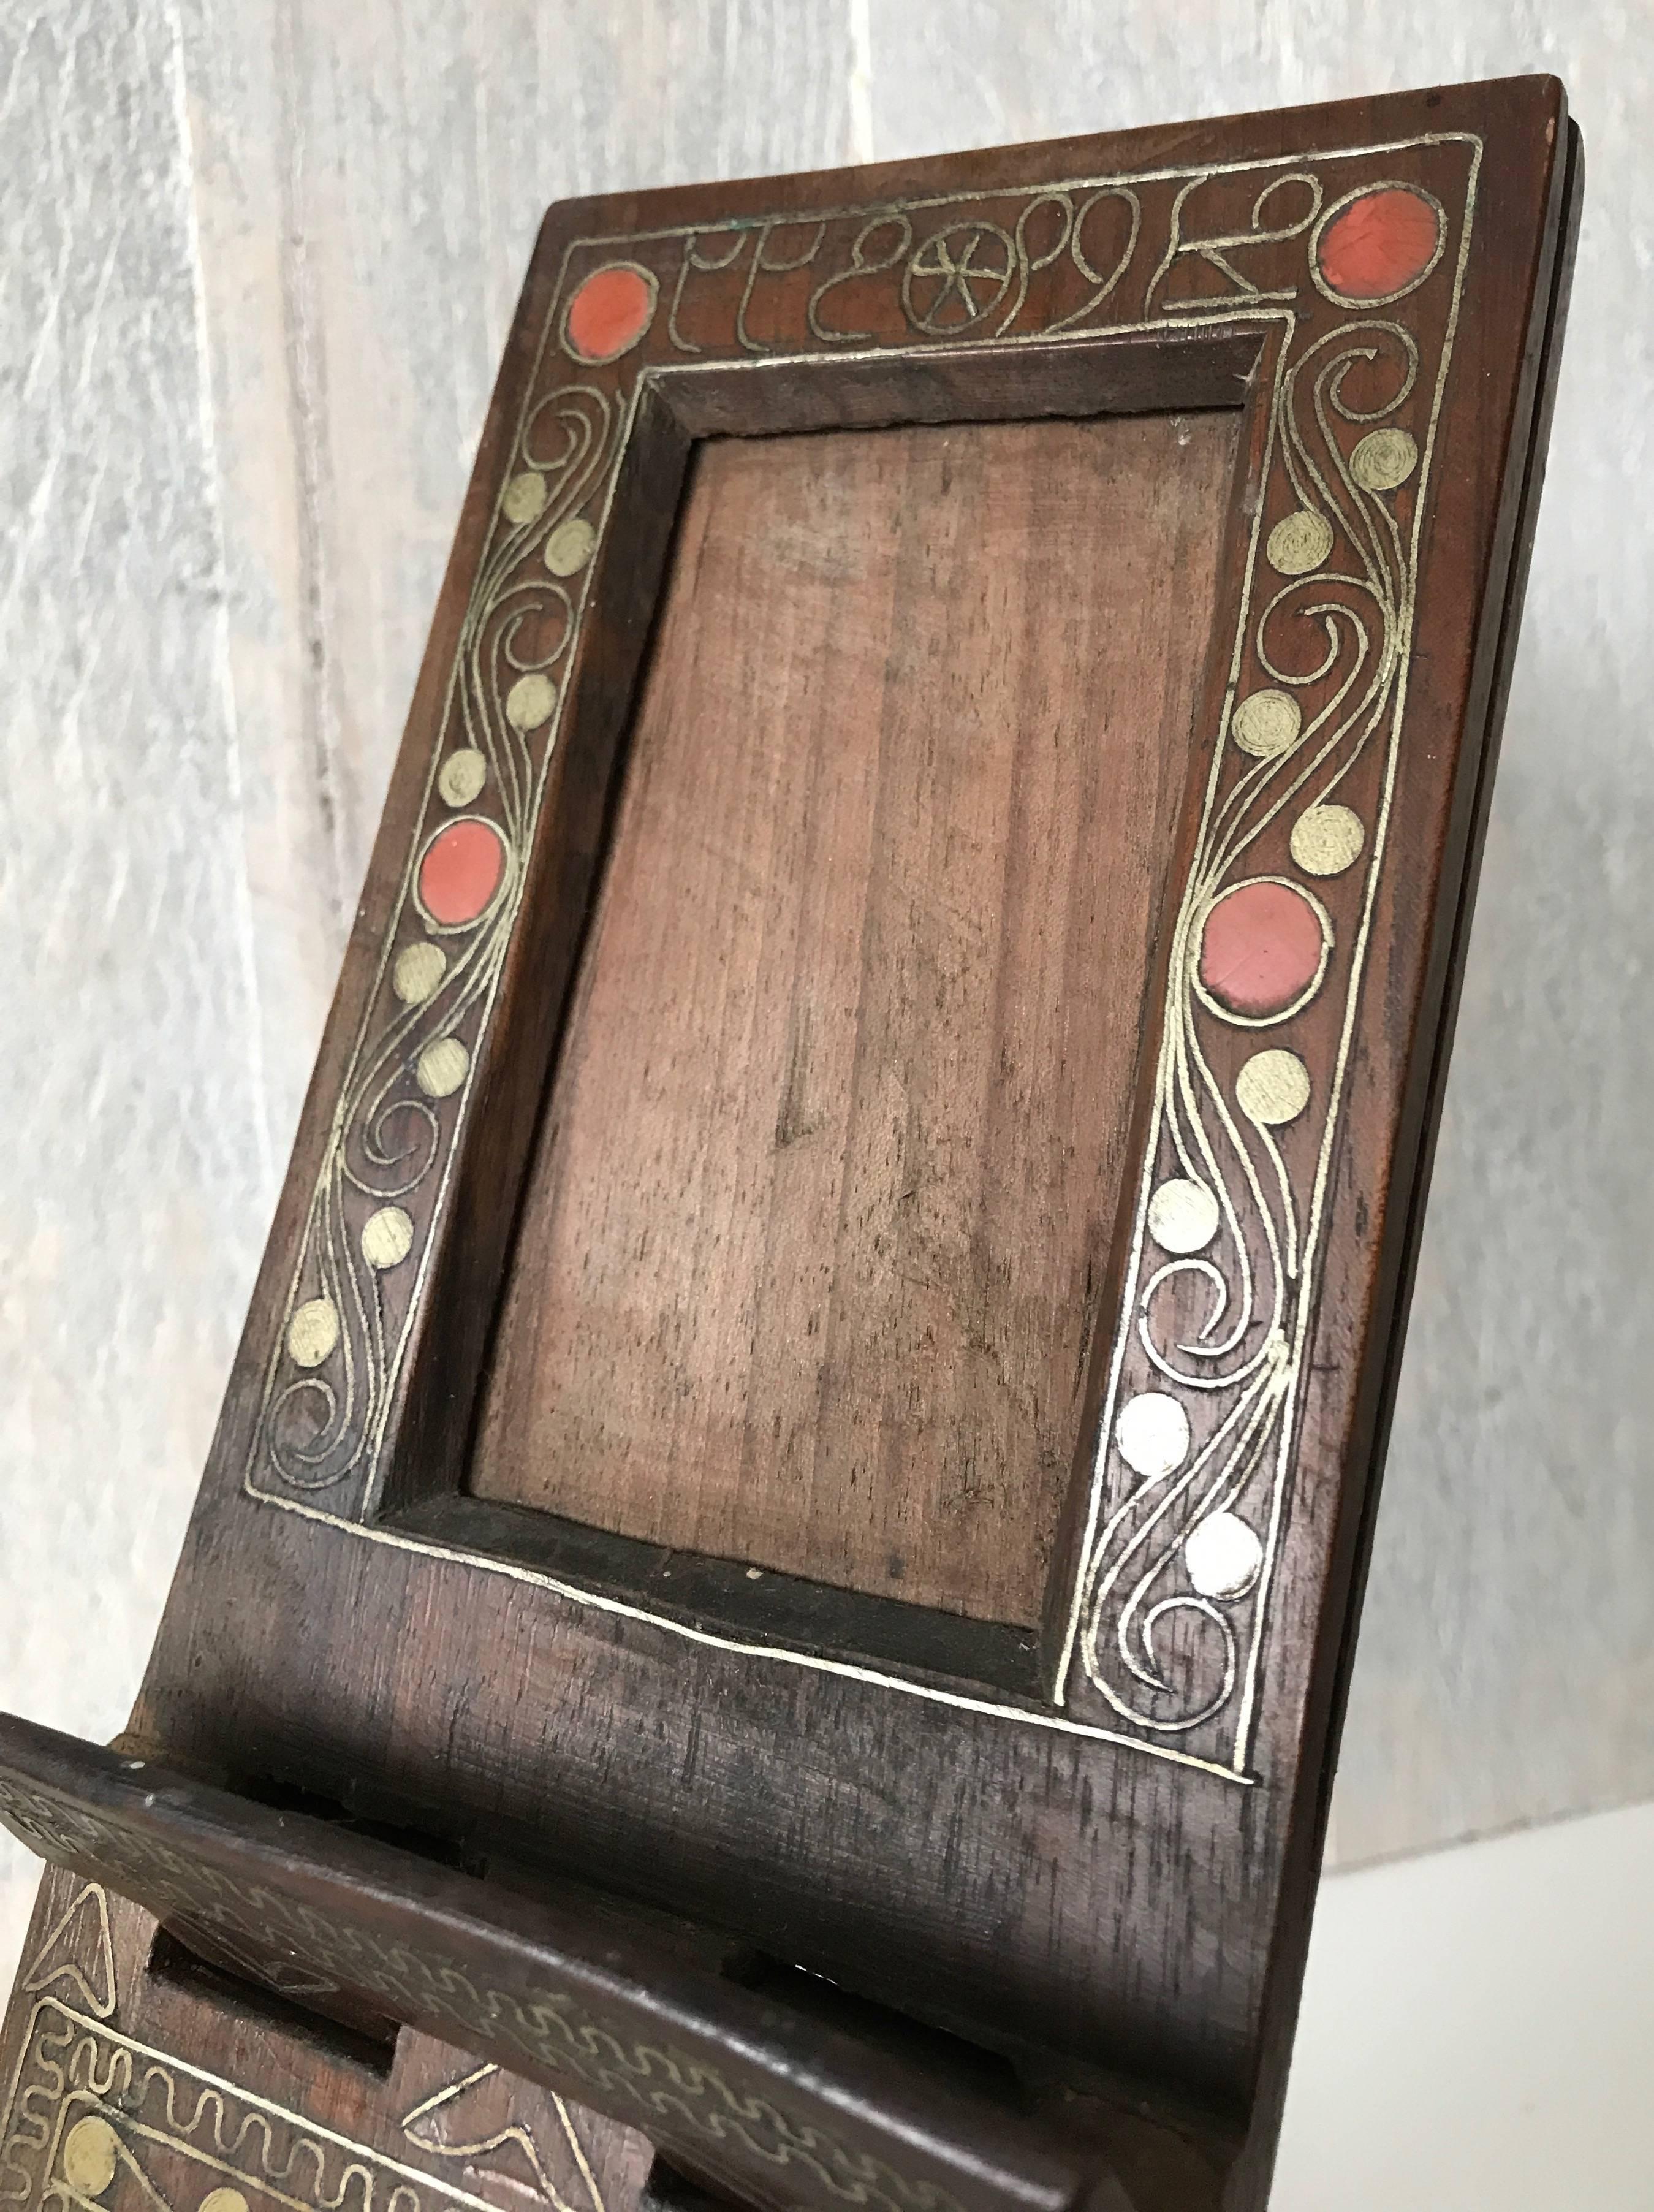 Handcrafted solid wooden, inlaid picture frame.

This, possibly Moorish, picture frame is easy to fold into a cross legged standing position and this rare example is inlaid with brass motifs and a glass-like red material. Thanks to its size it